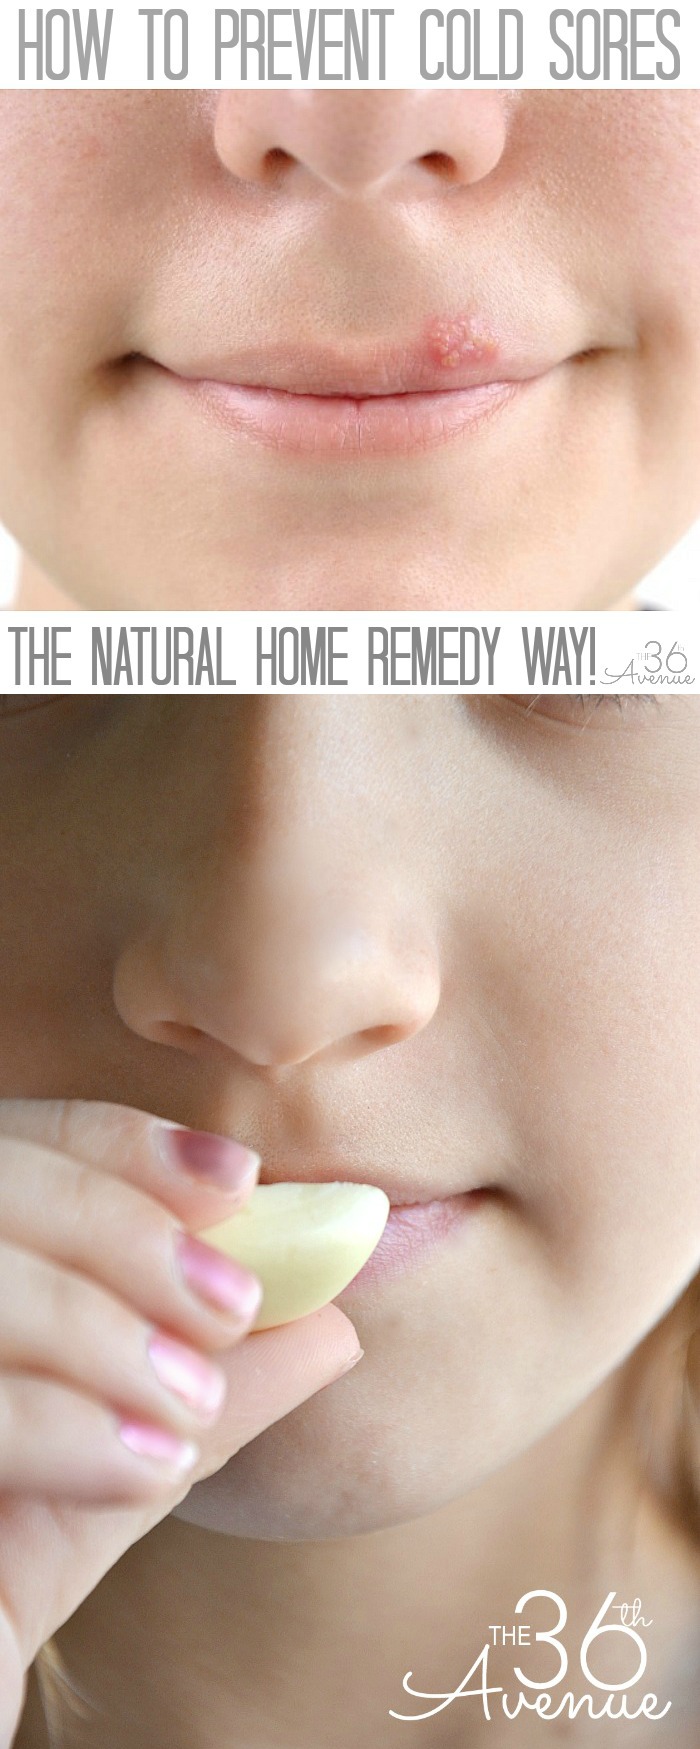 How to prevent COLD SORES at the36thavenue.com The easy NATURAL HOME REMEDY way.. You want to pin this! 